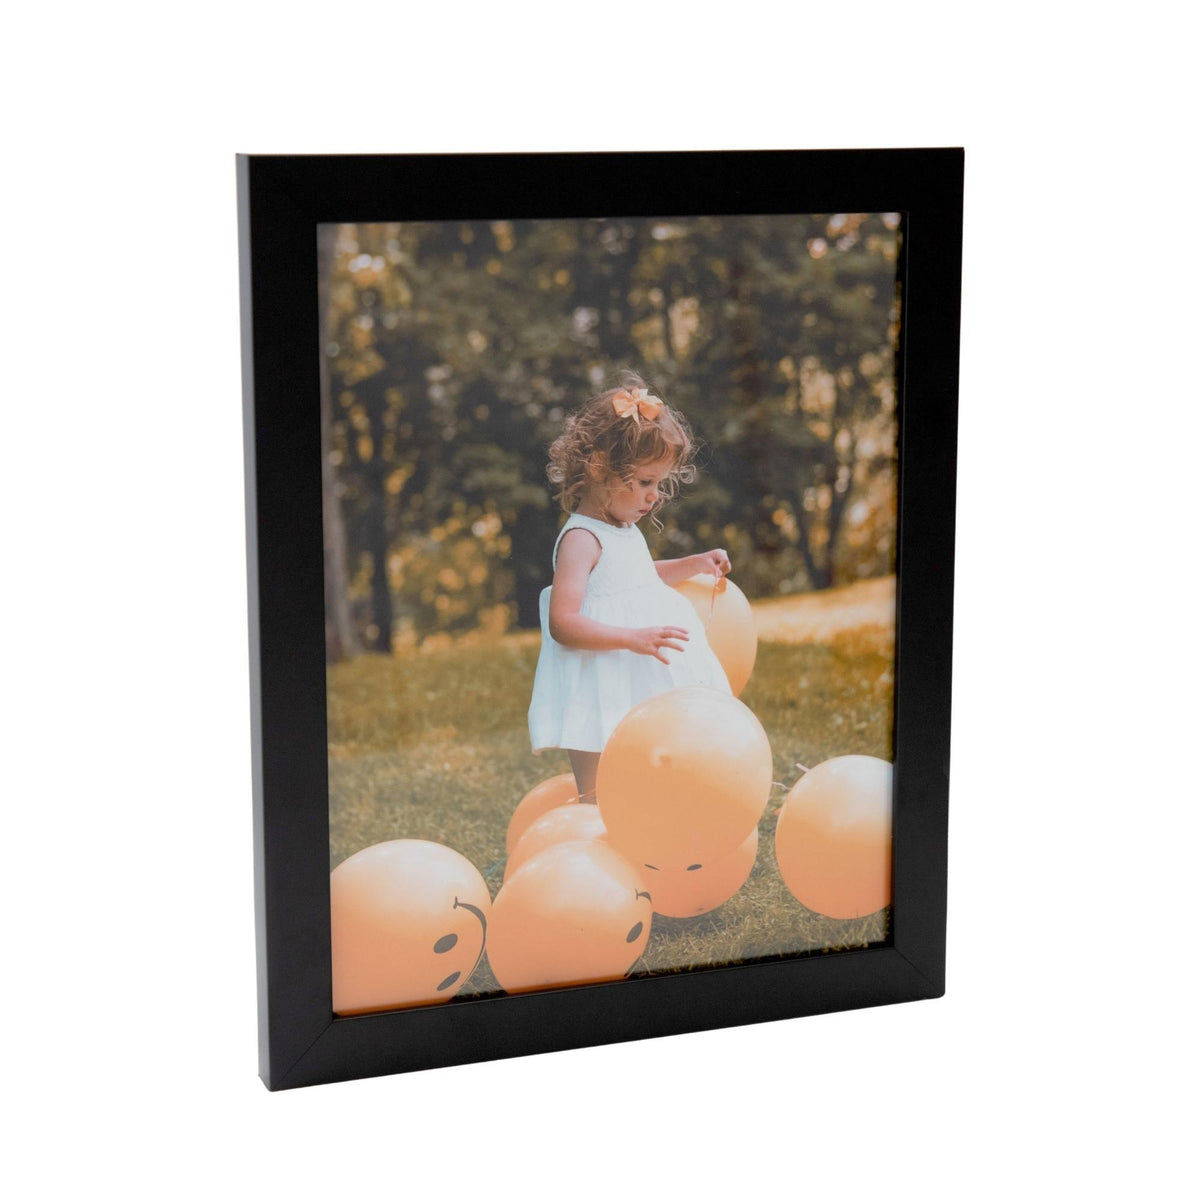 Dark Wood Canvas Picture Frame Two Tone Large 19x22 for 12x16